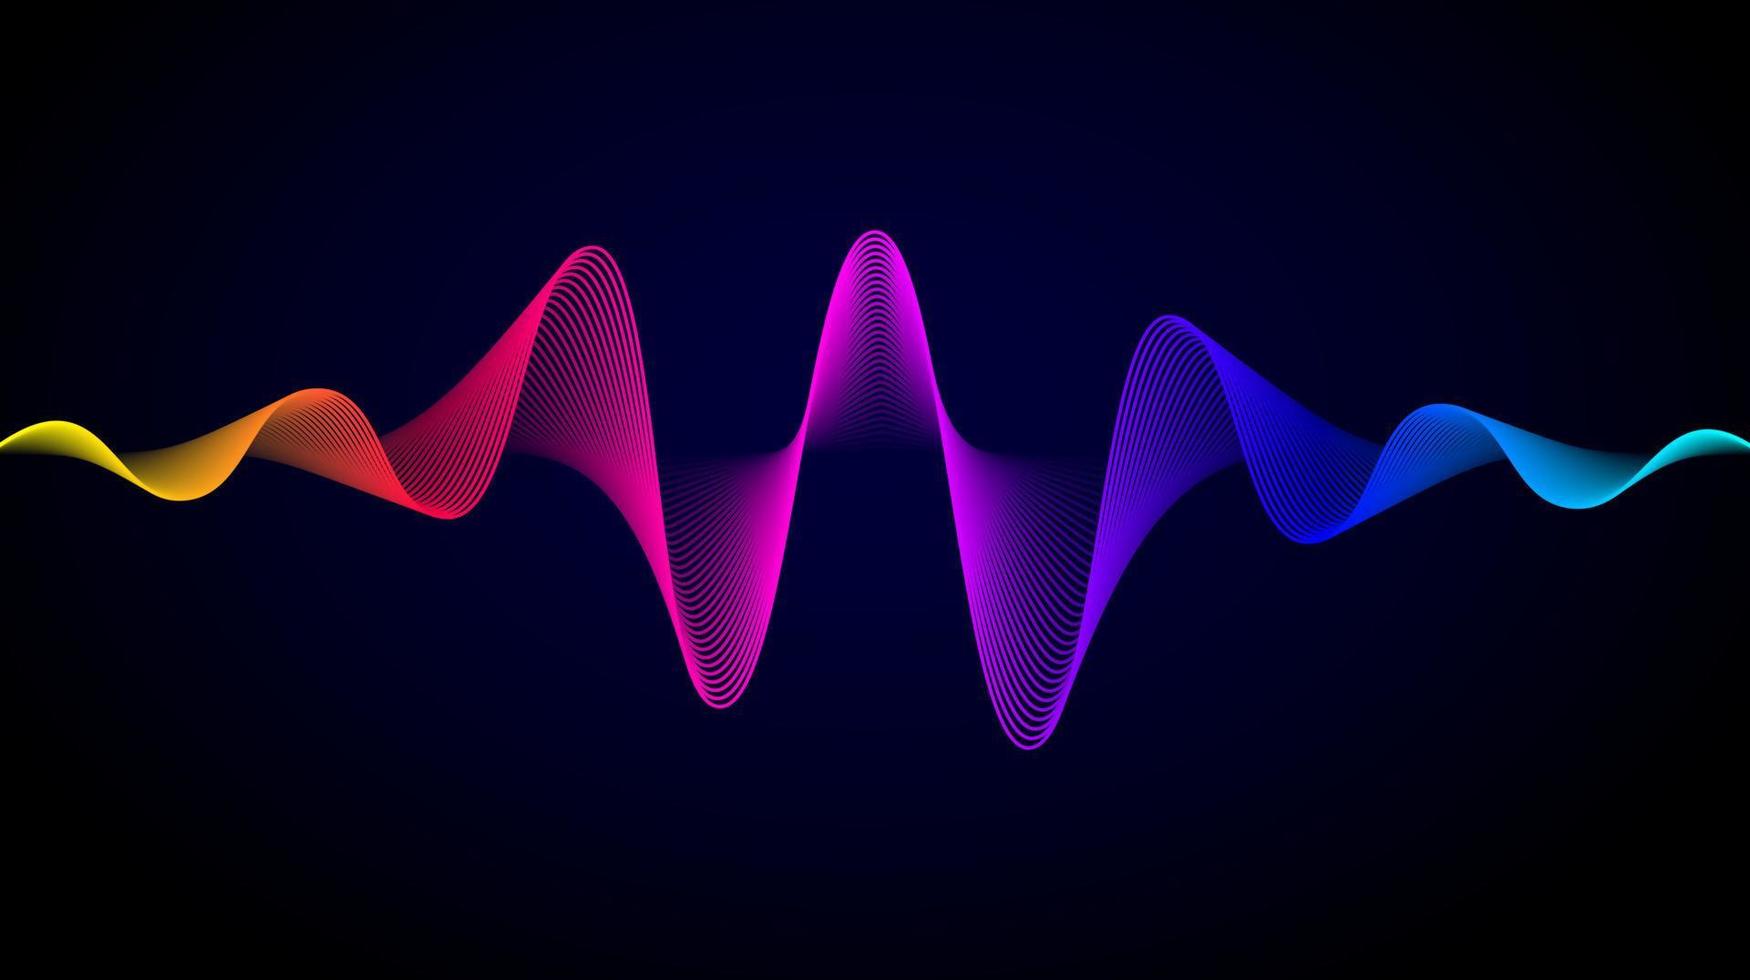 Abstract dynamic colorful flowing lines light design. Sound wave background. Vector illustration of music, technology concept